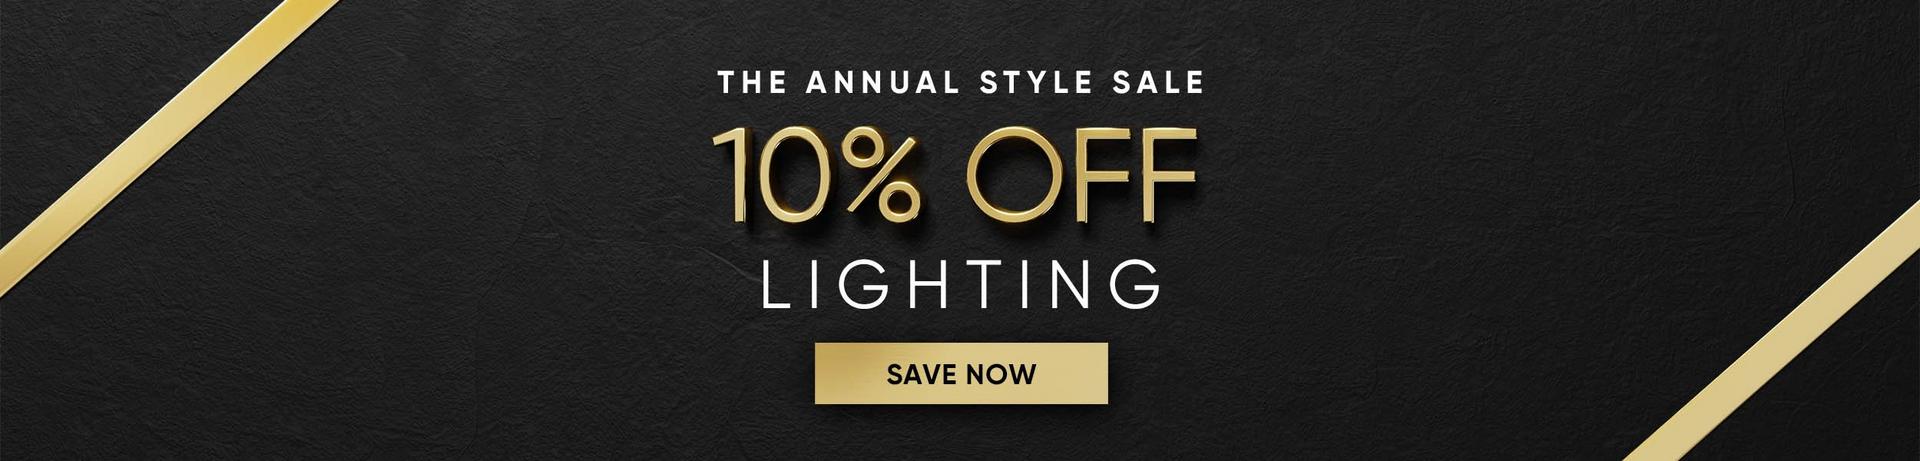 The Annual Style Sale - 10% Off Lighting